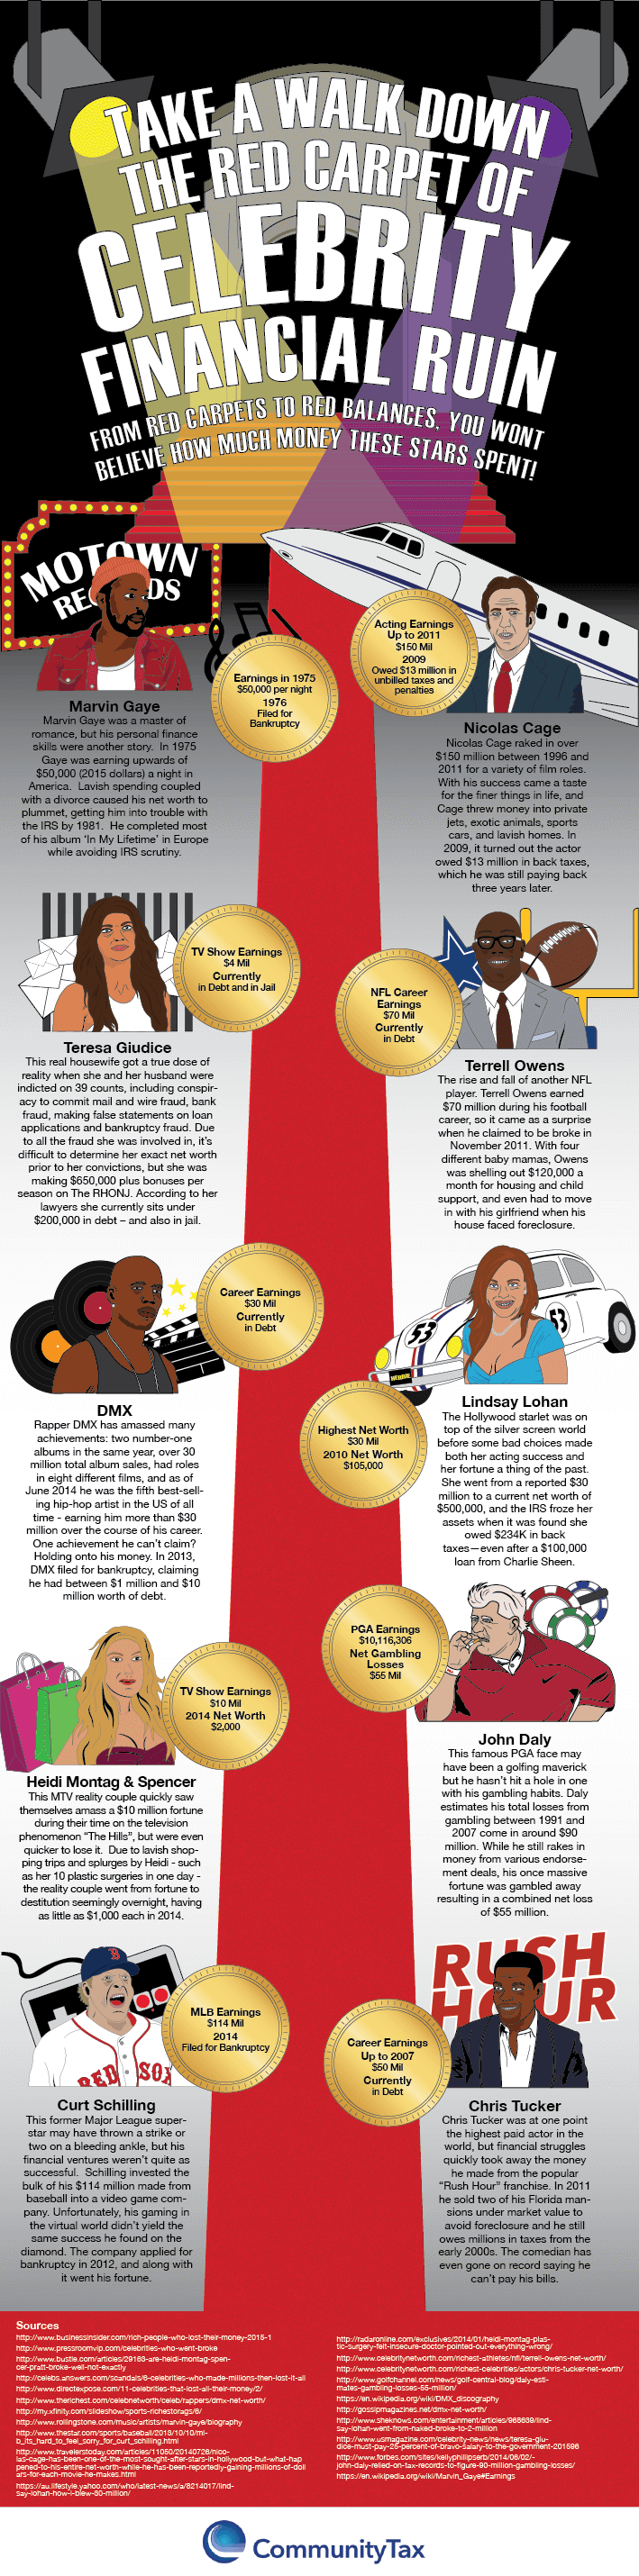 Celebrities-Who Squandered-Their-Financial-Fortunes-infographic